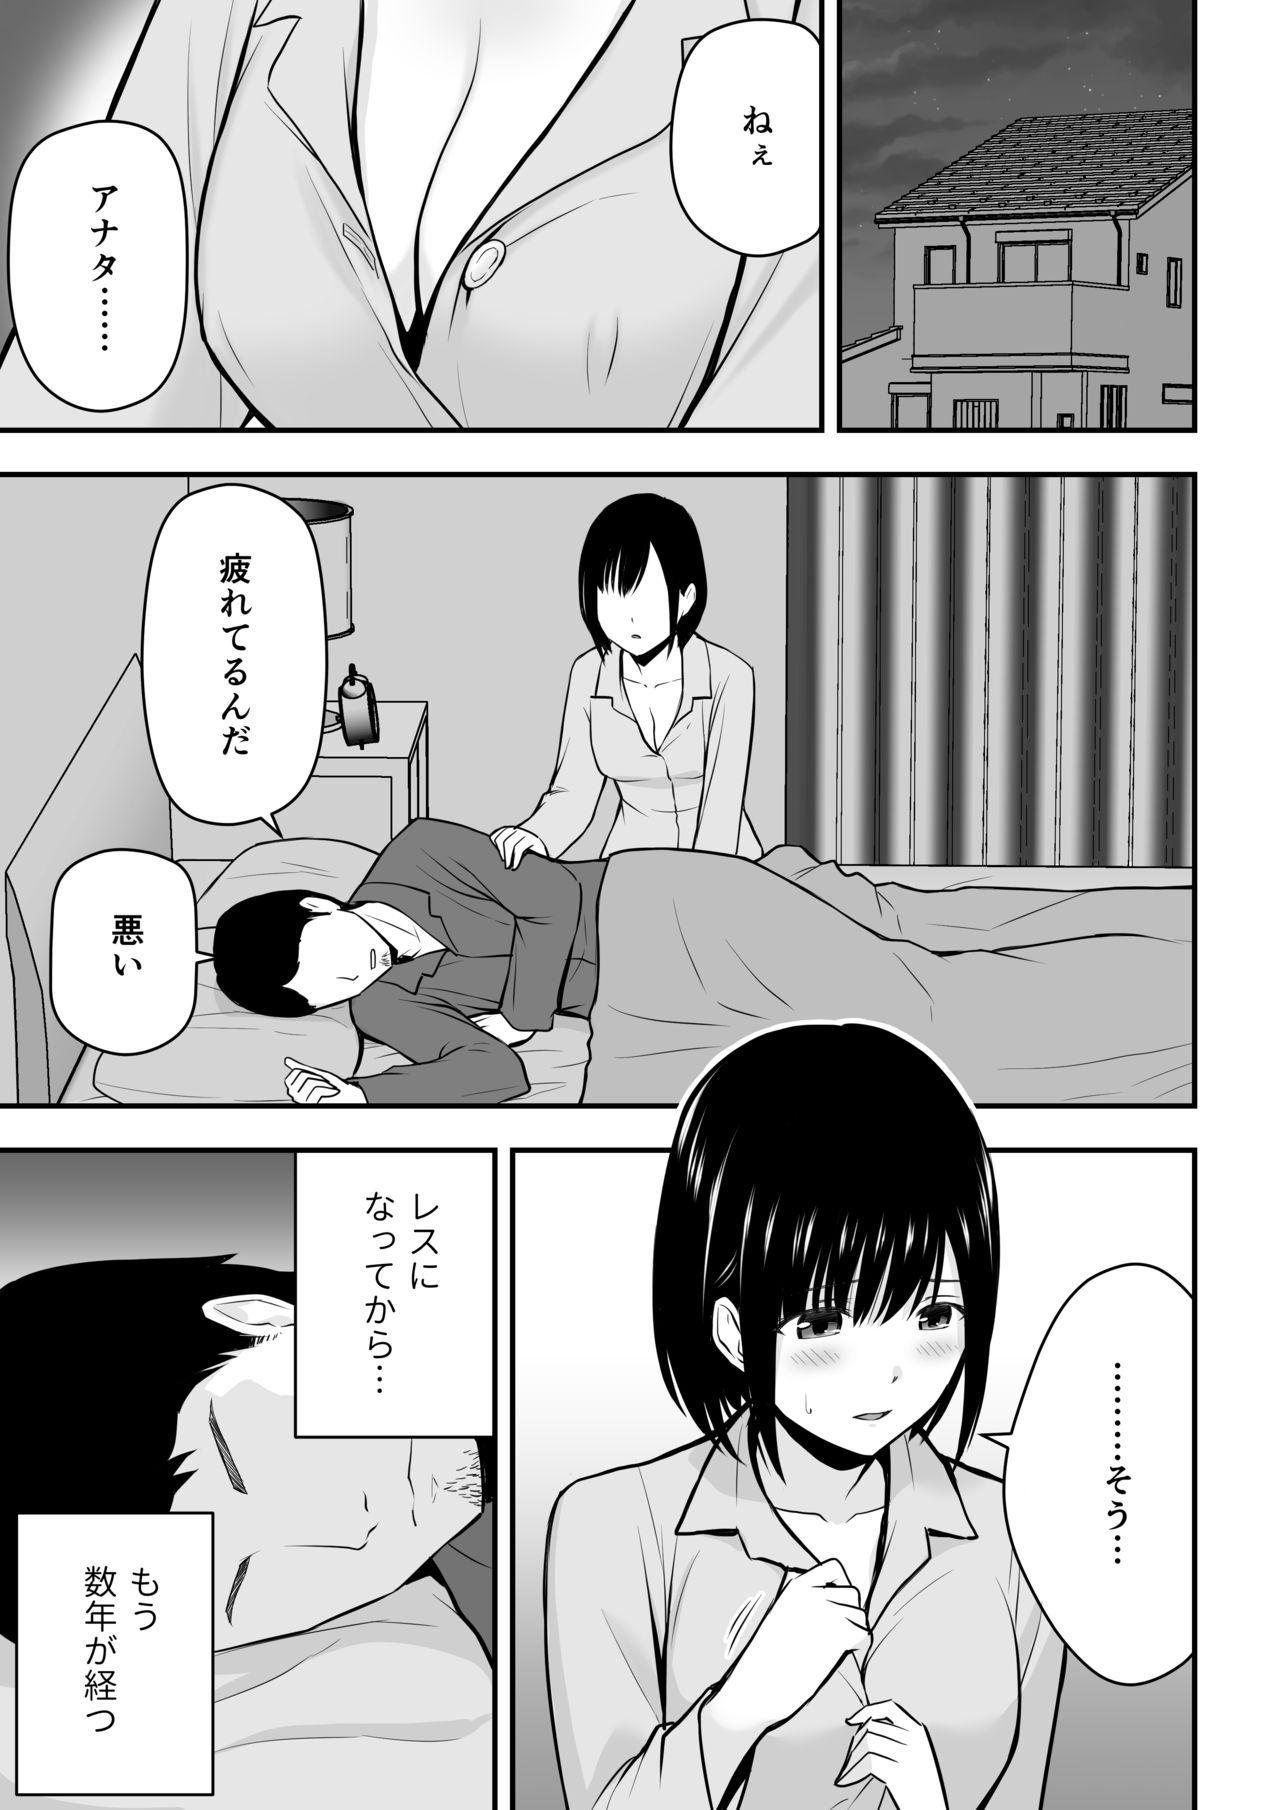 Spreadeagle 愛する妻との寝取られ生活 - Original Inked - Page 2